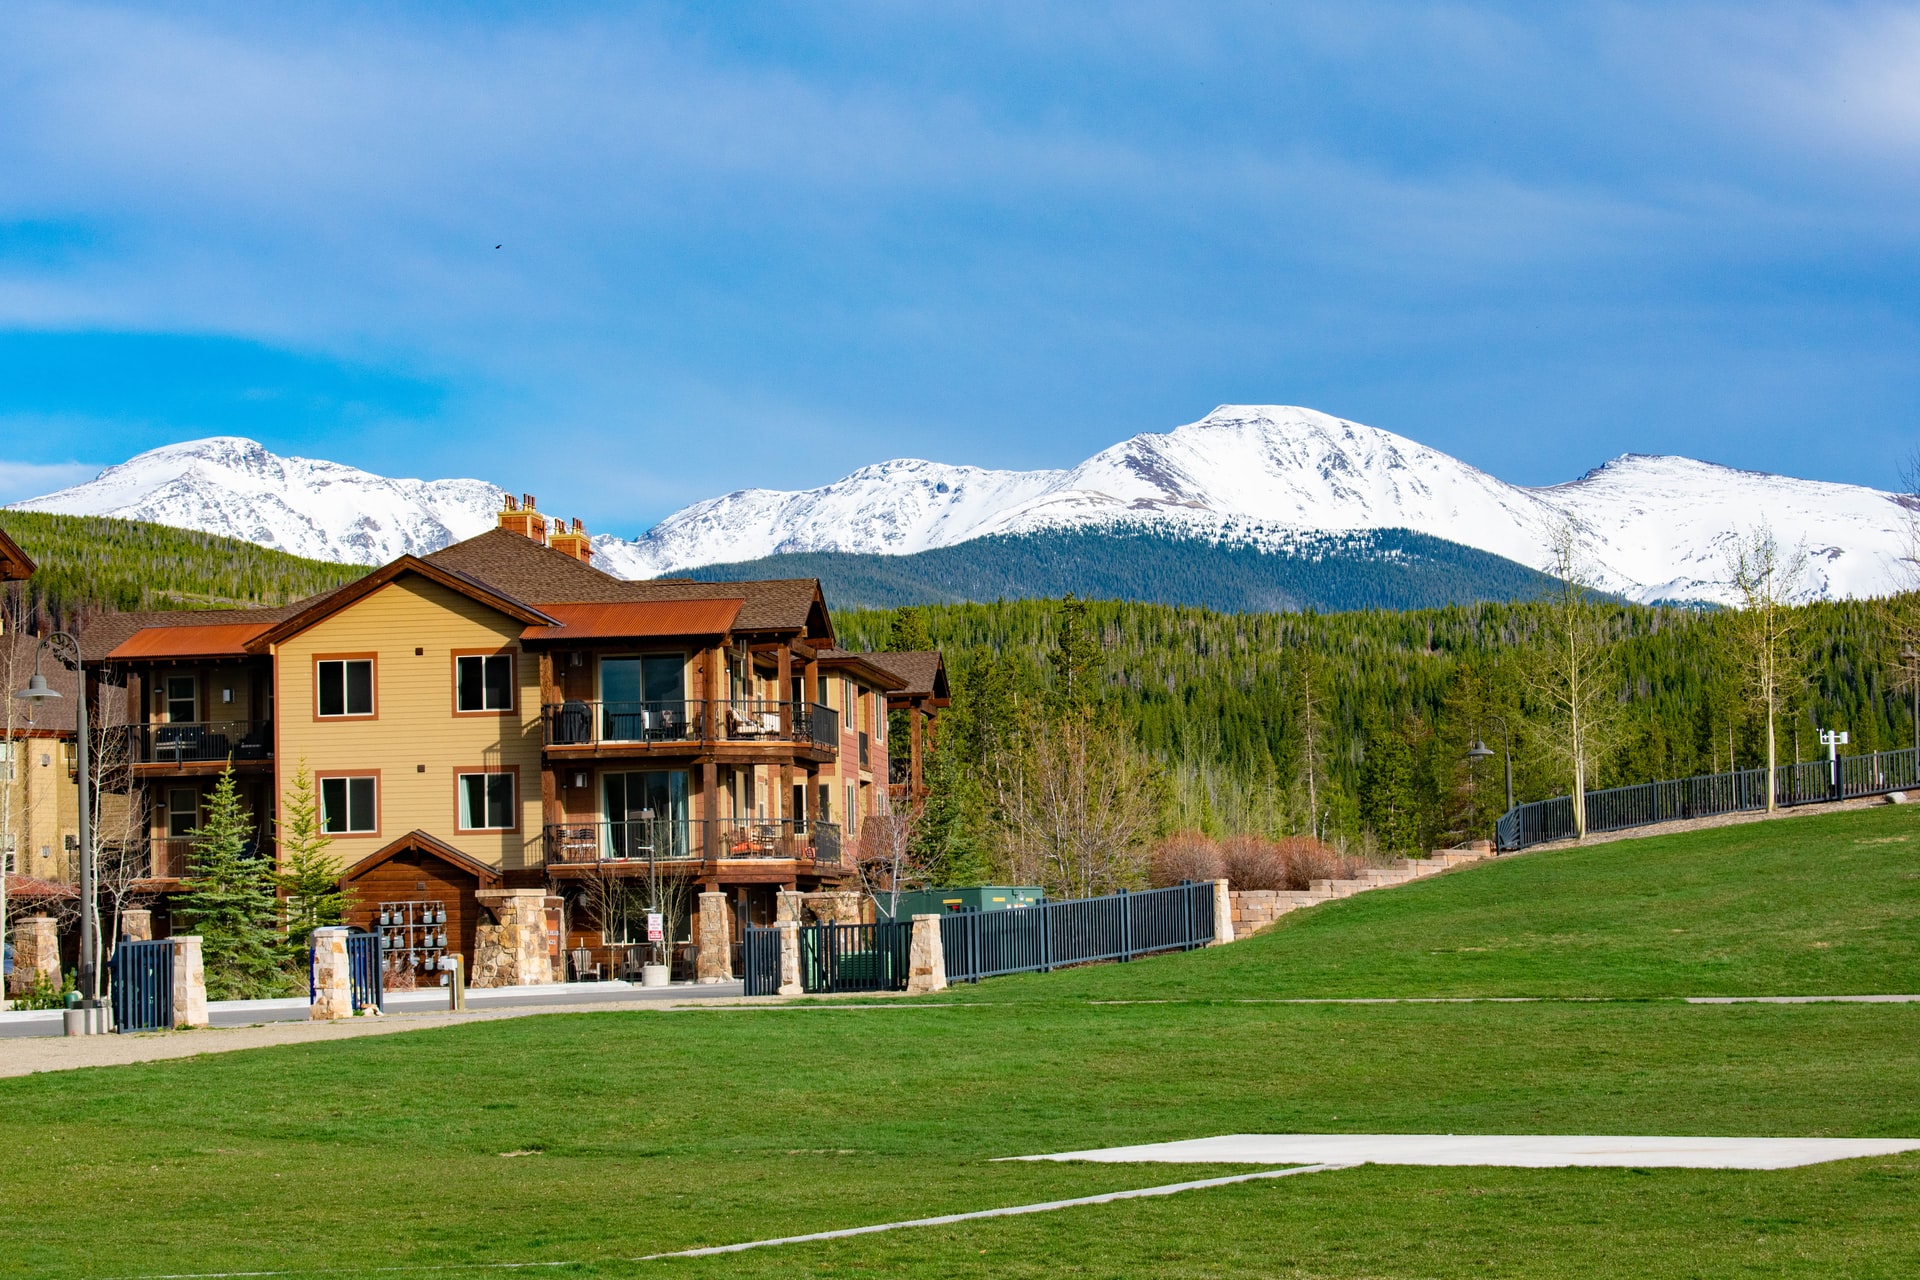 condominium on field with mountains behind